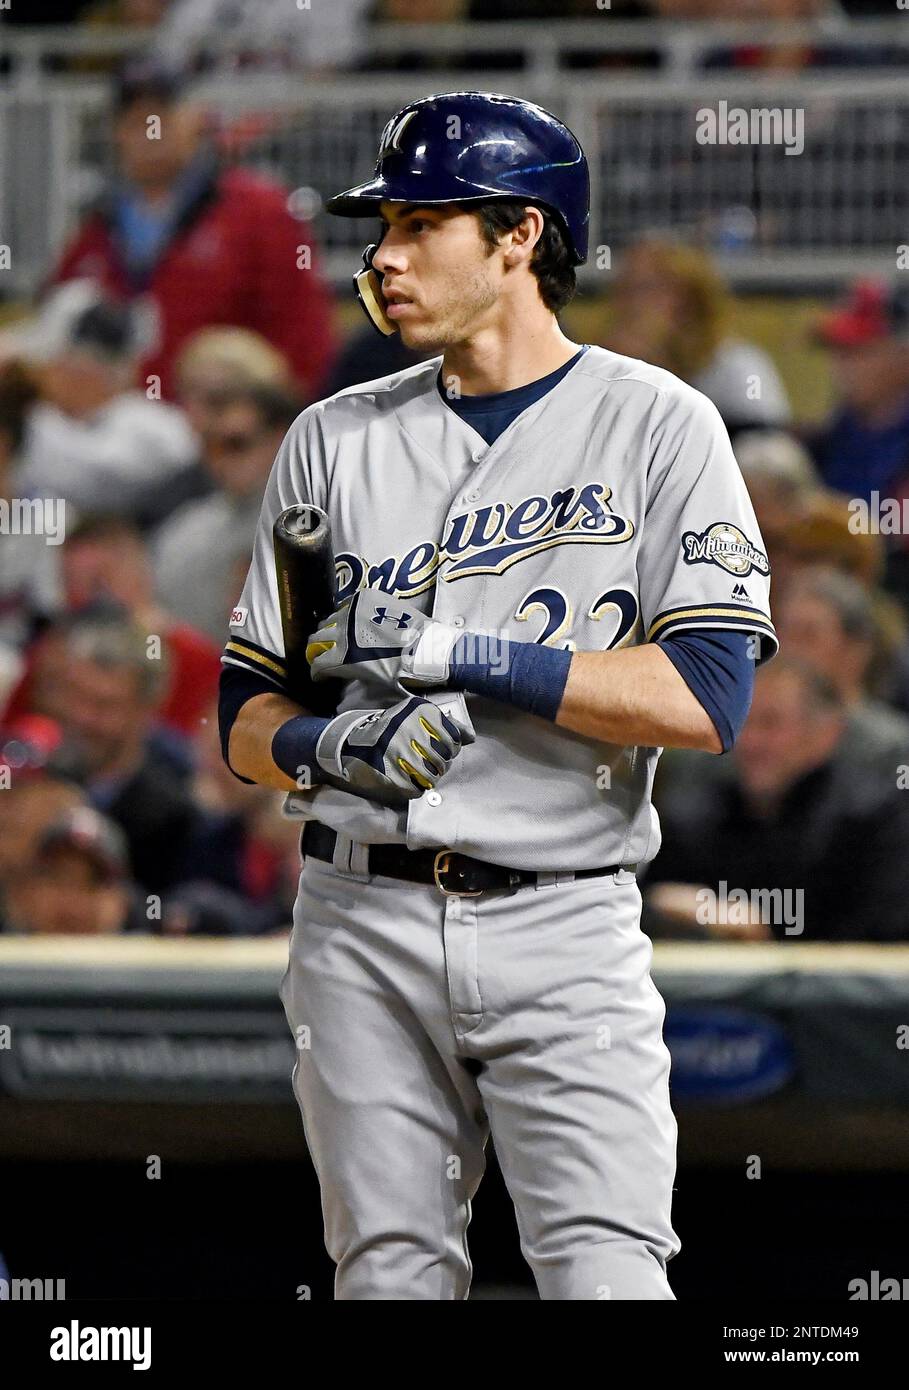 MINNEAPOLIS, MN - MAY 28: Milwaukee Brewers Outfield Christian Yelich (22)  adjusts his batting glove during a game between the Milwaukee Brewers and  Minnesota Twins on May 28, 2019 at Target Field